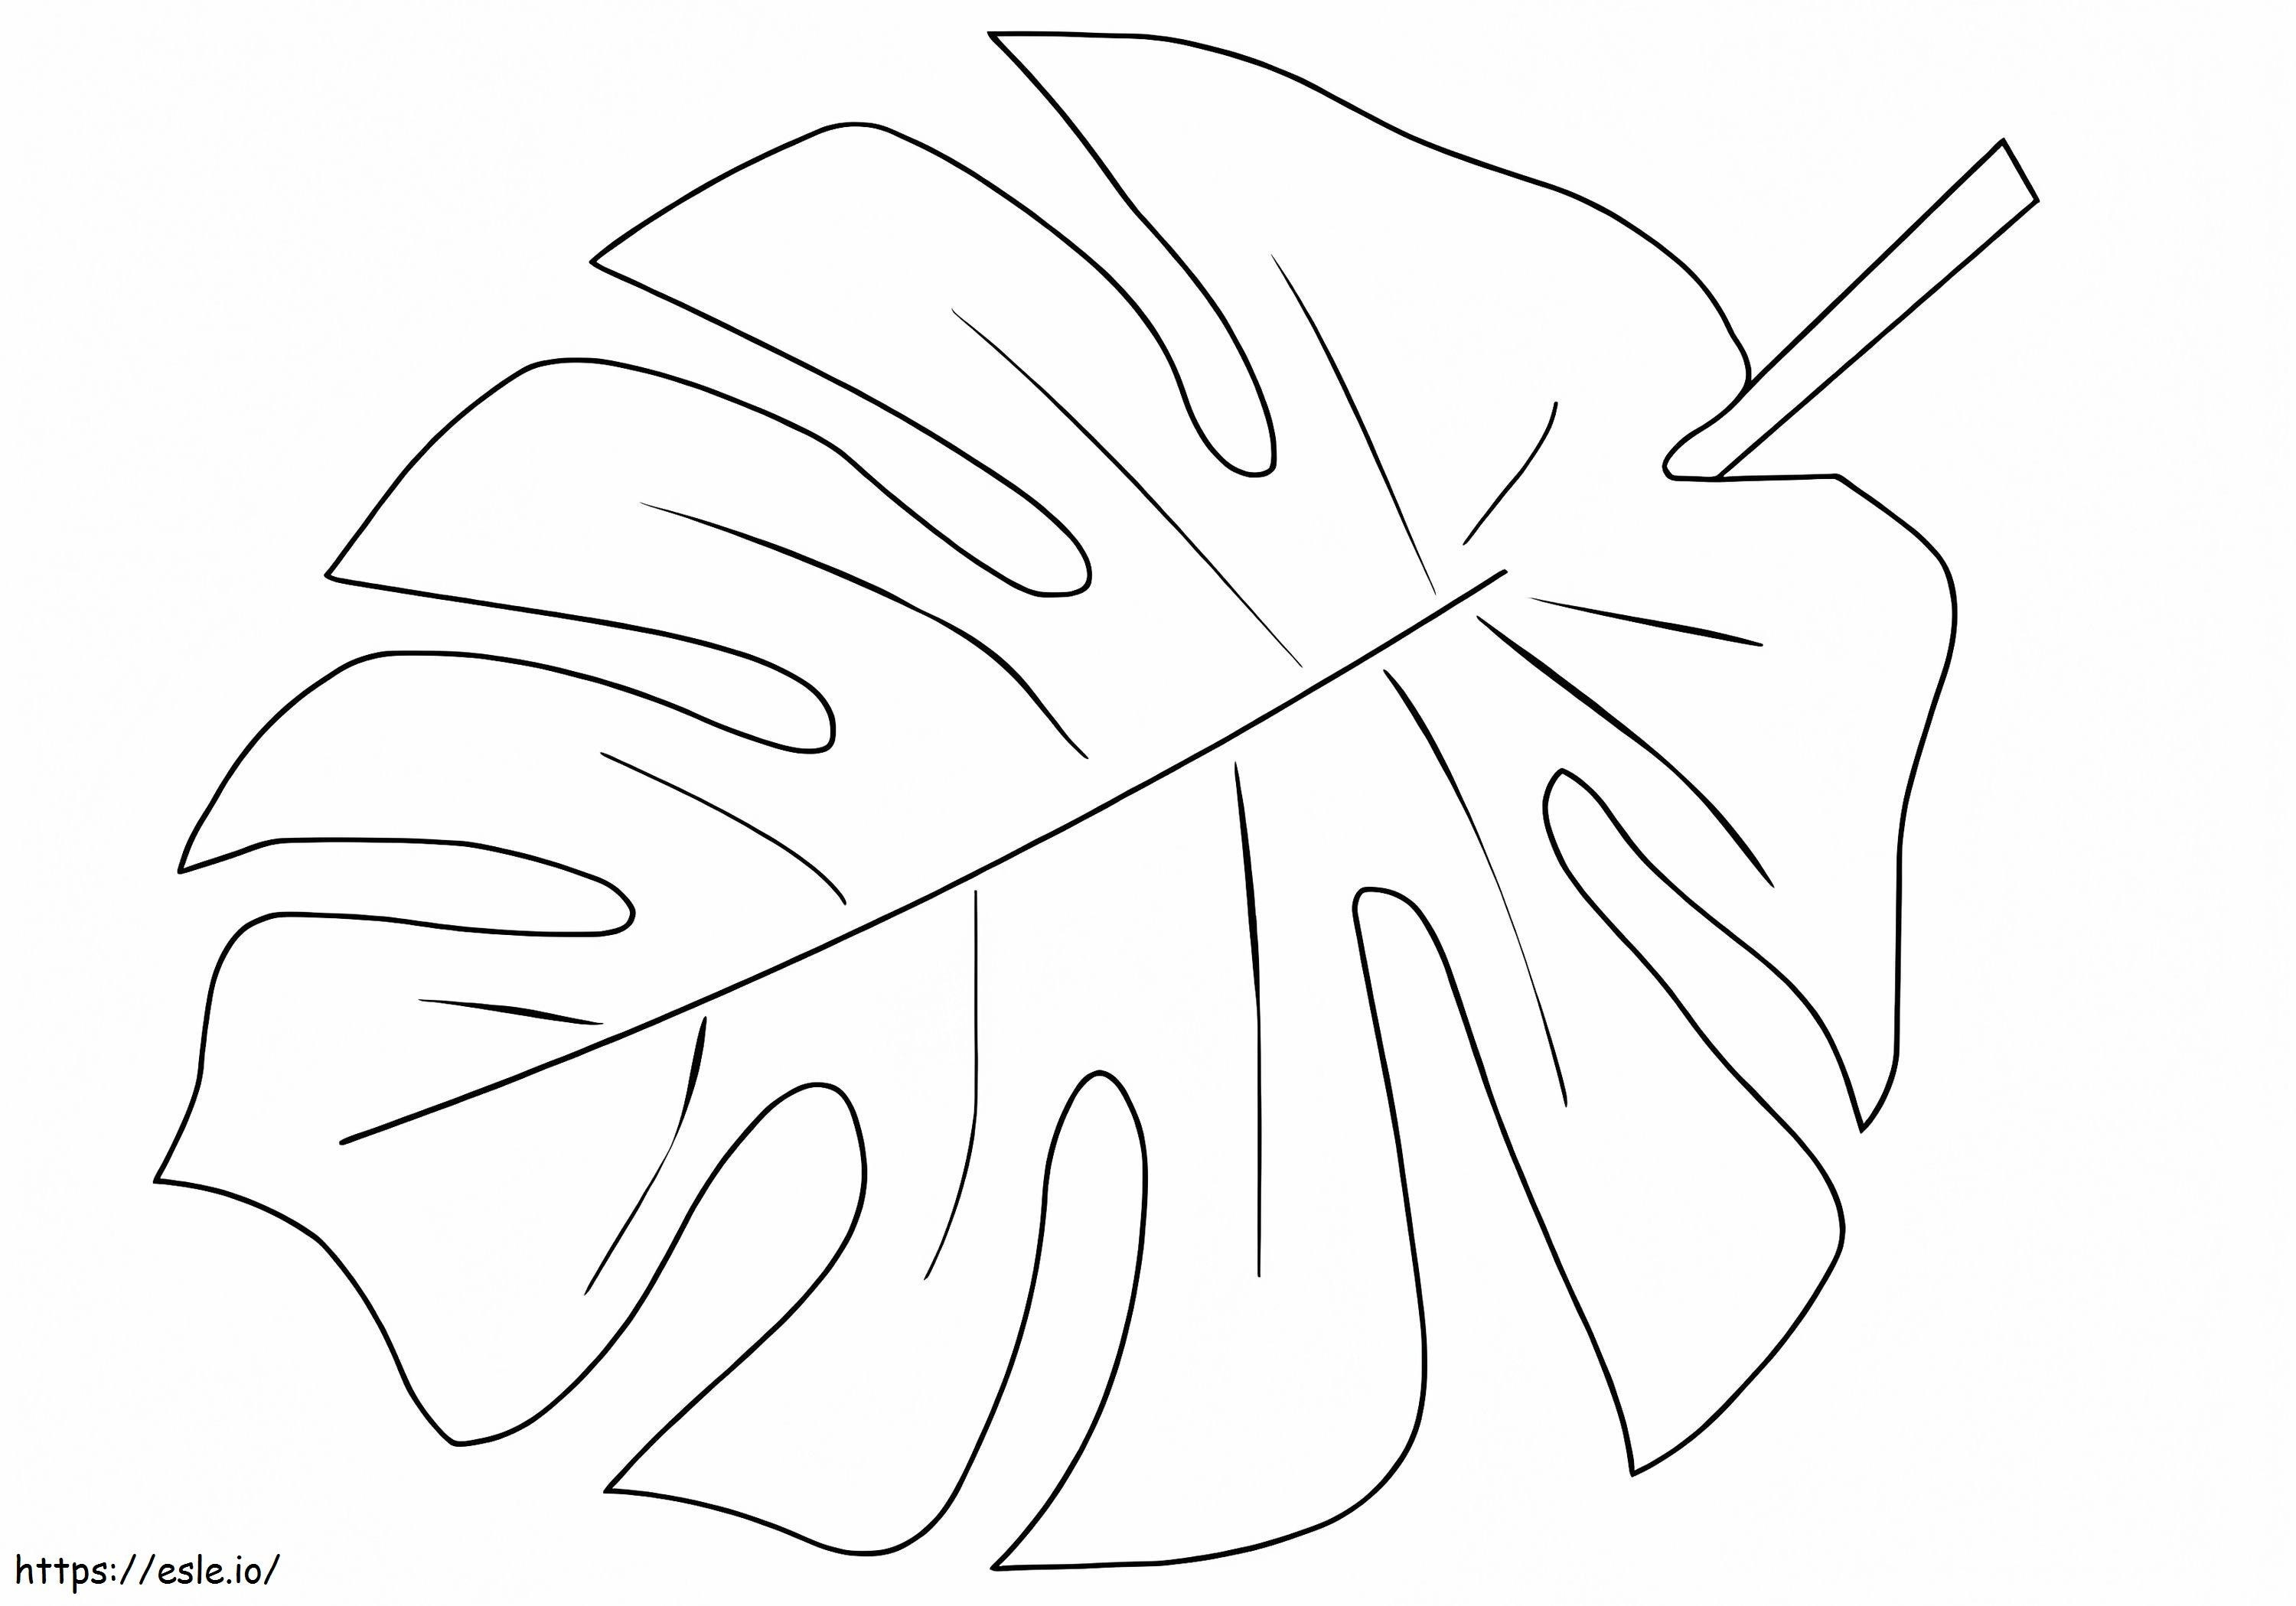 Palm Leaf coloring page